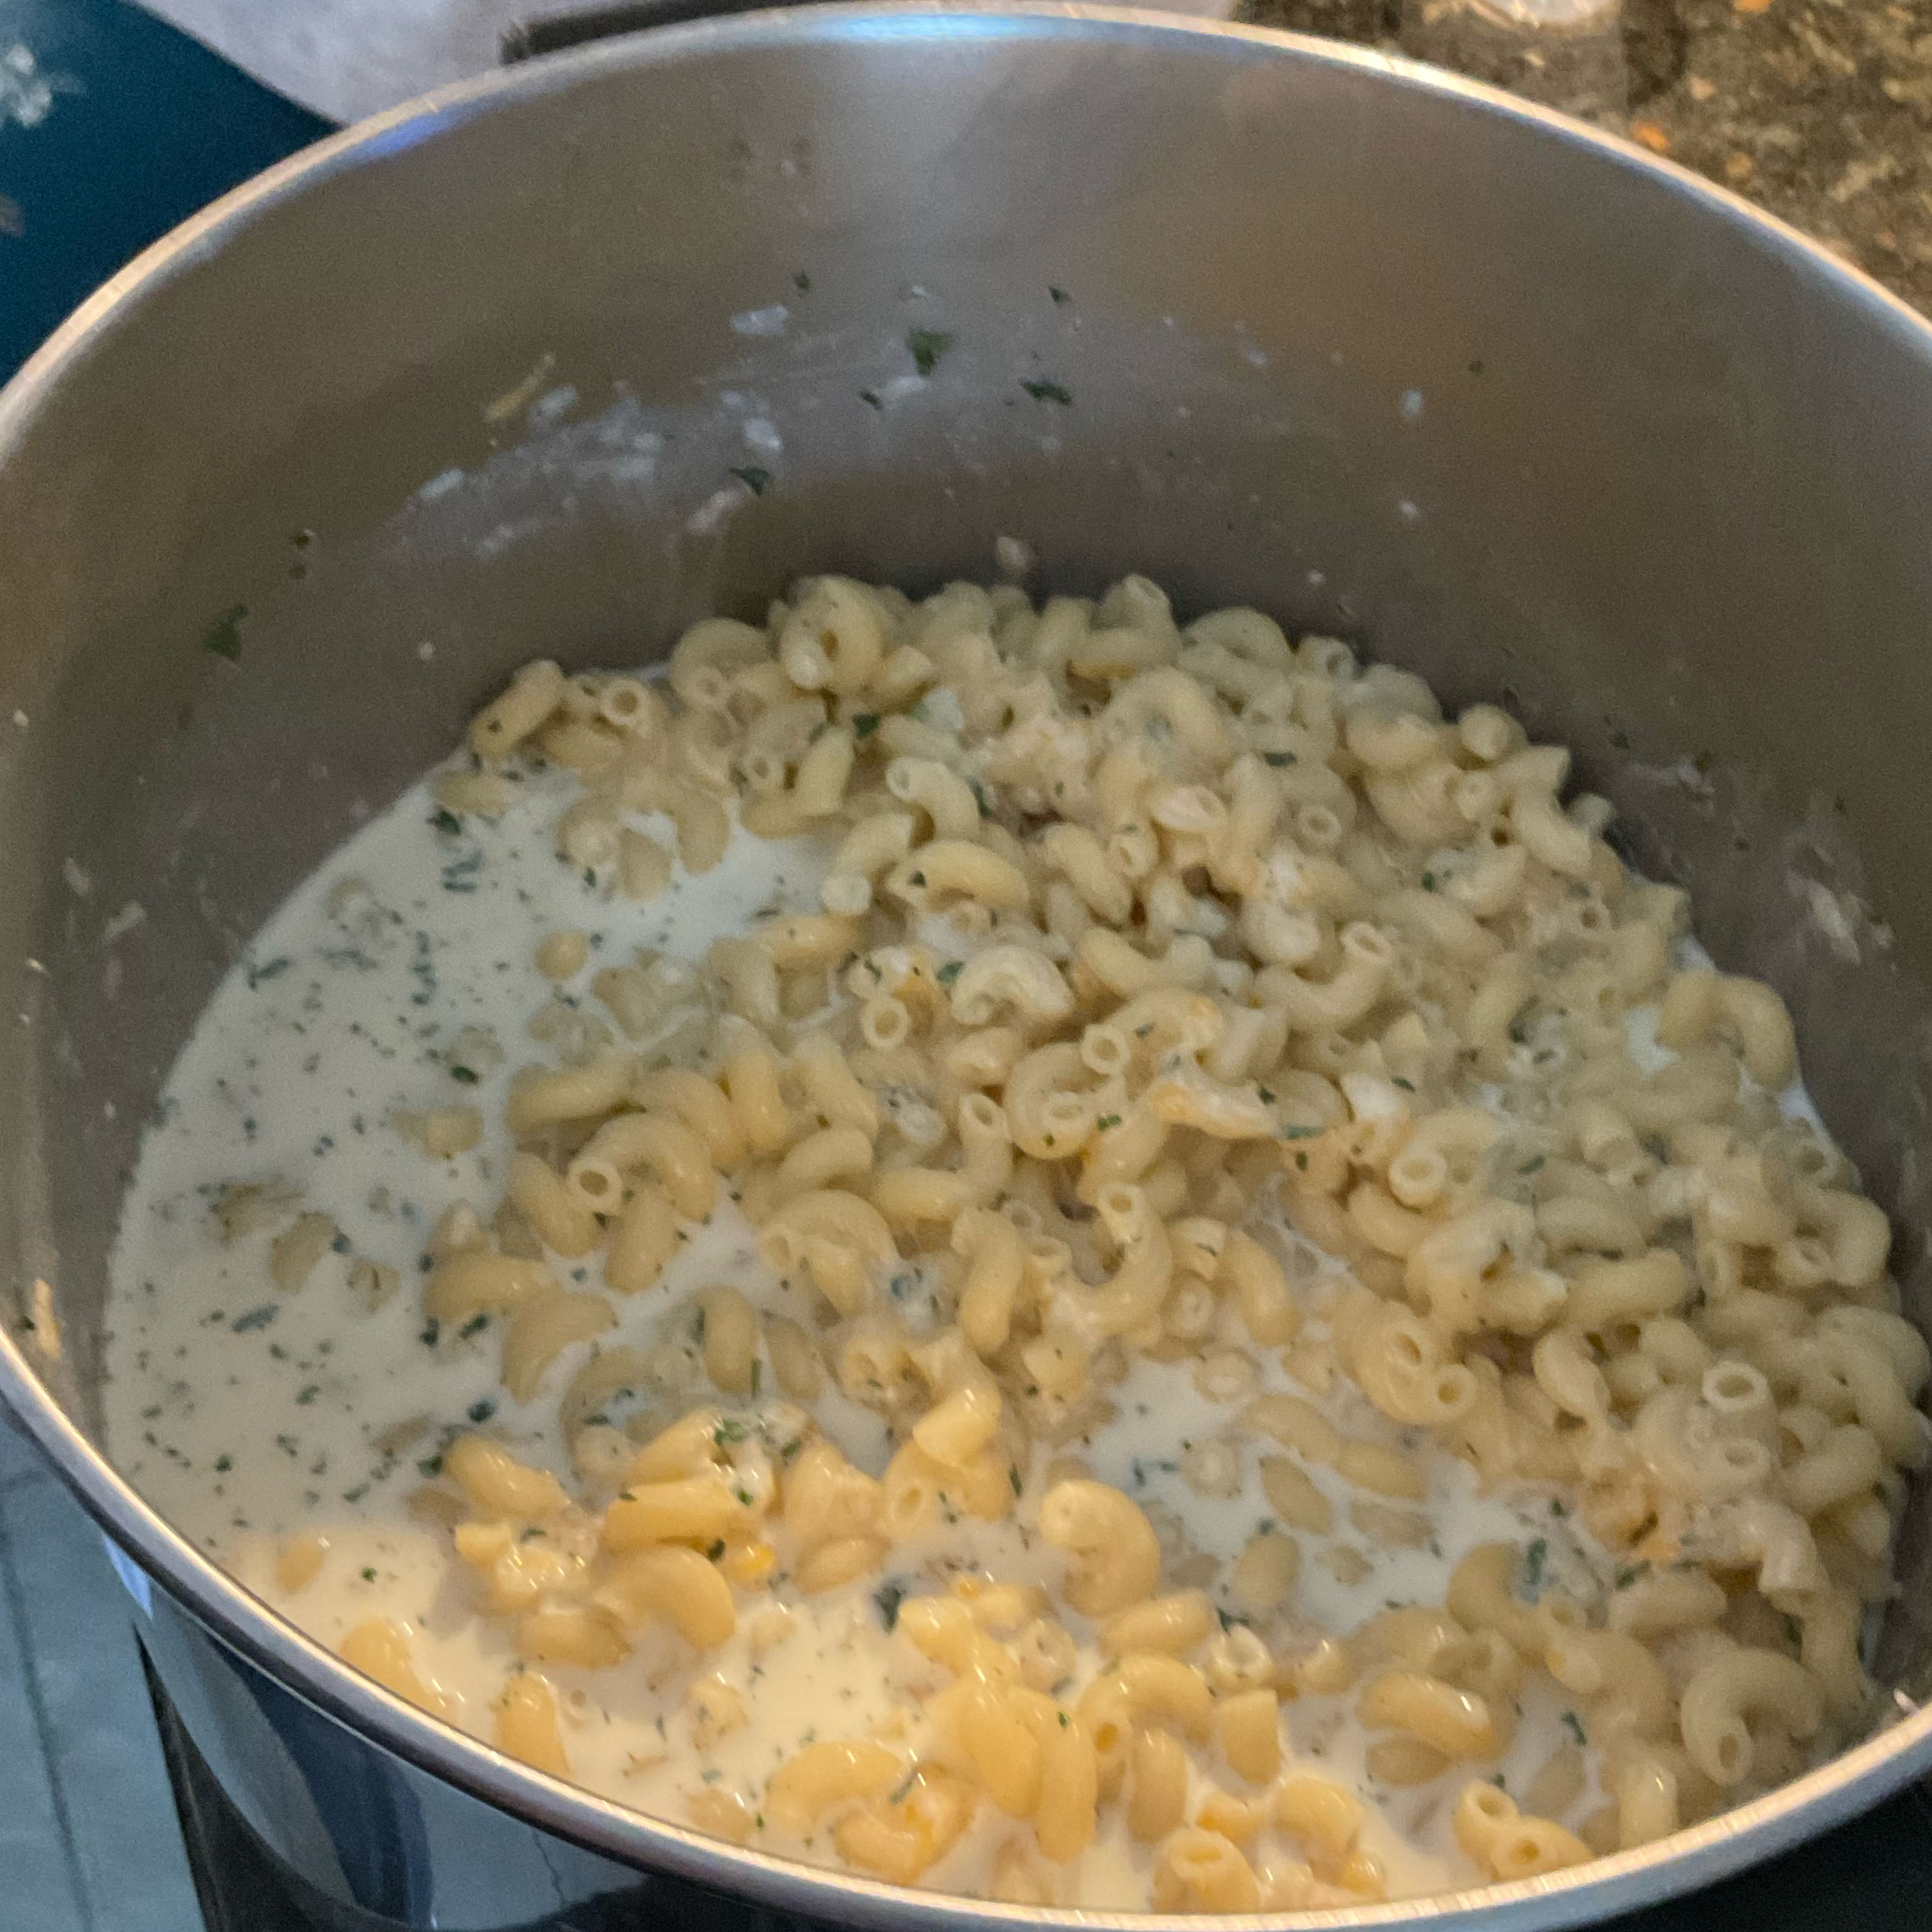 Place strained macaroni ￼into large bowl. Mix in cream, milk, flour, parsley leaves, salt, three quarters of the cheese mix, and pepper into the bowl and stir.￼